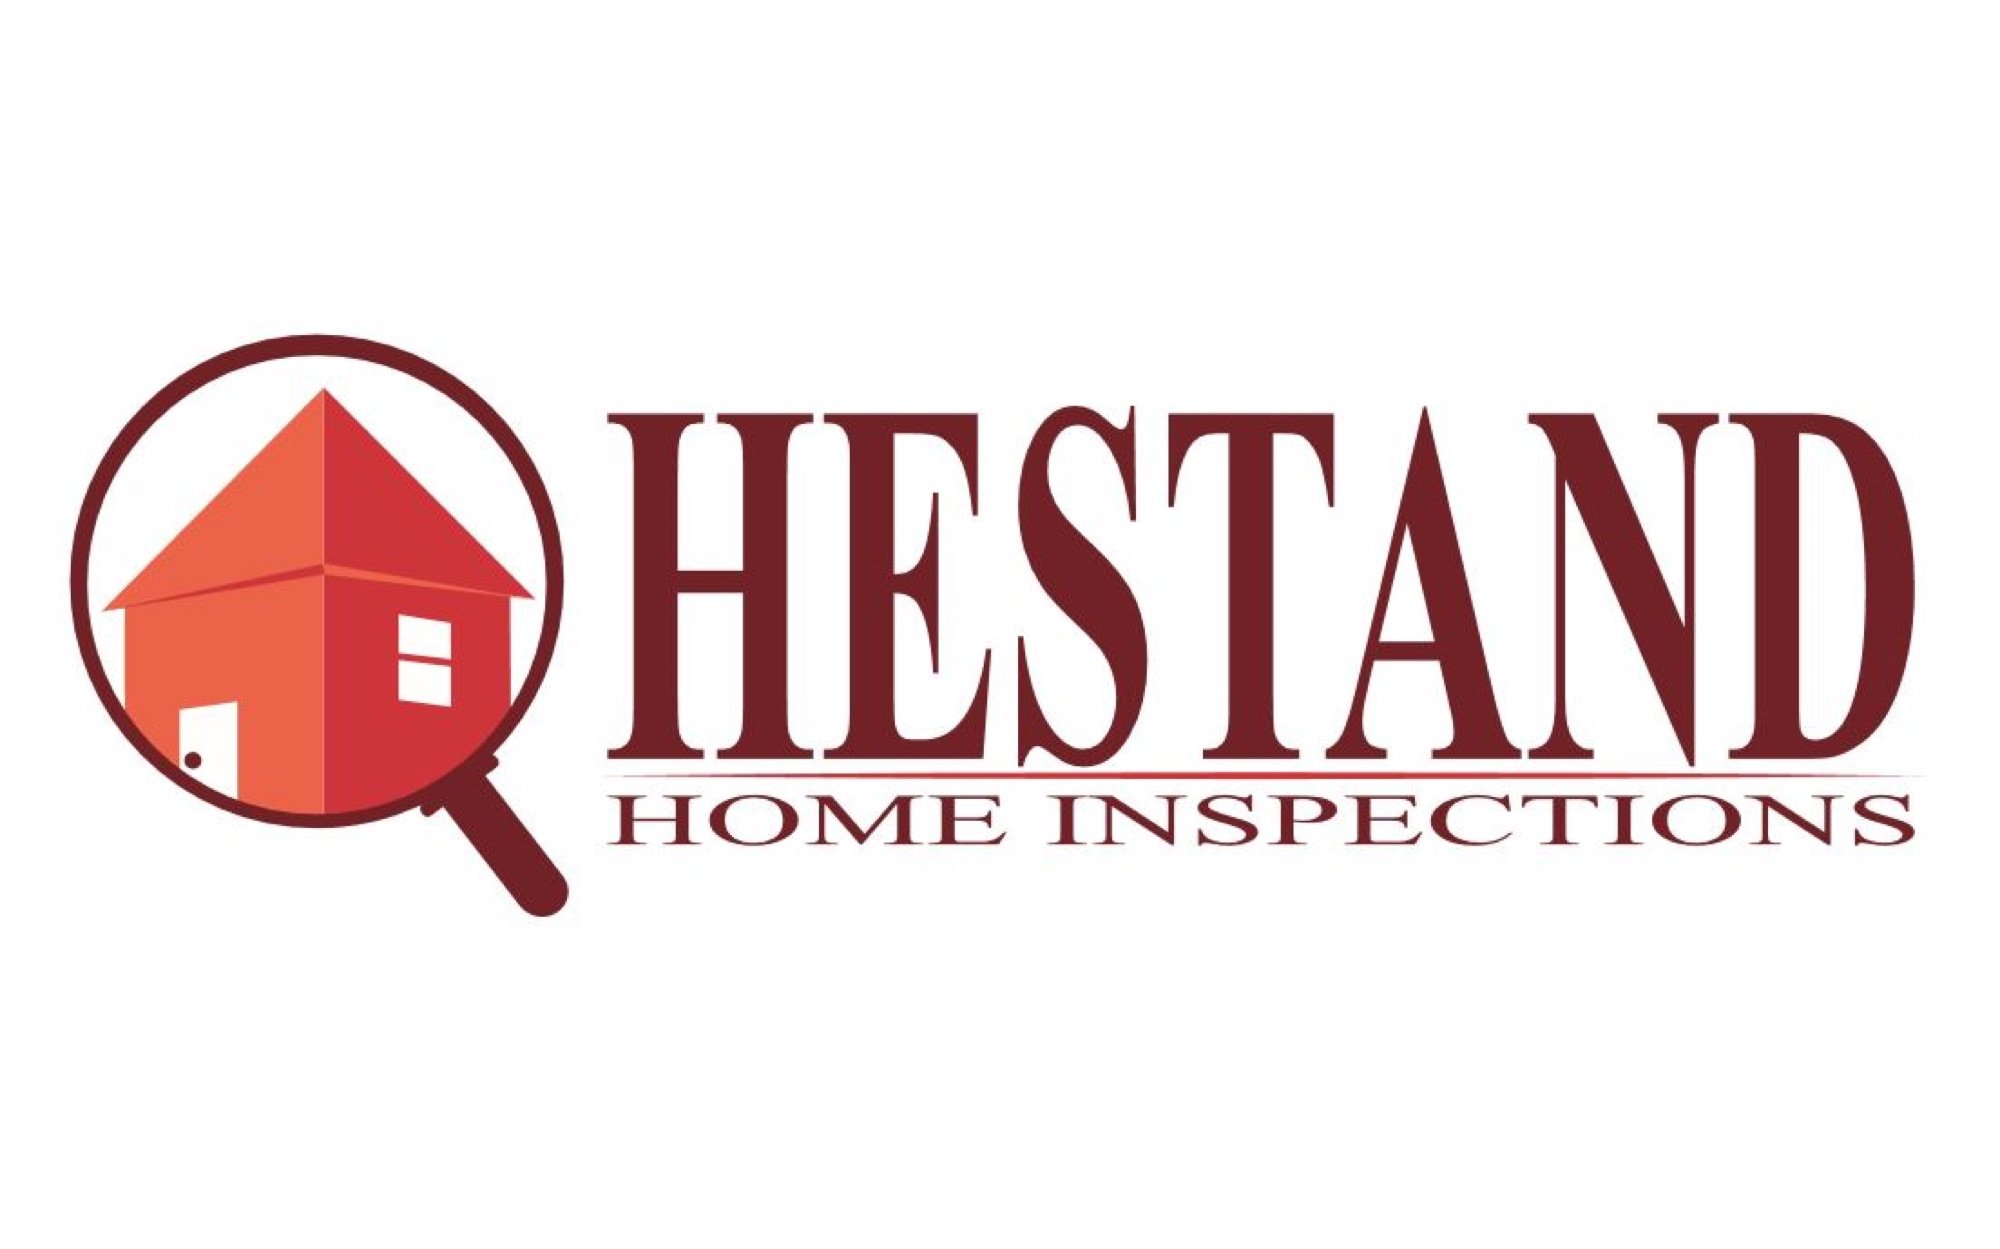 Hestand Home Inspections Logo